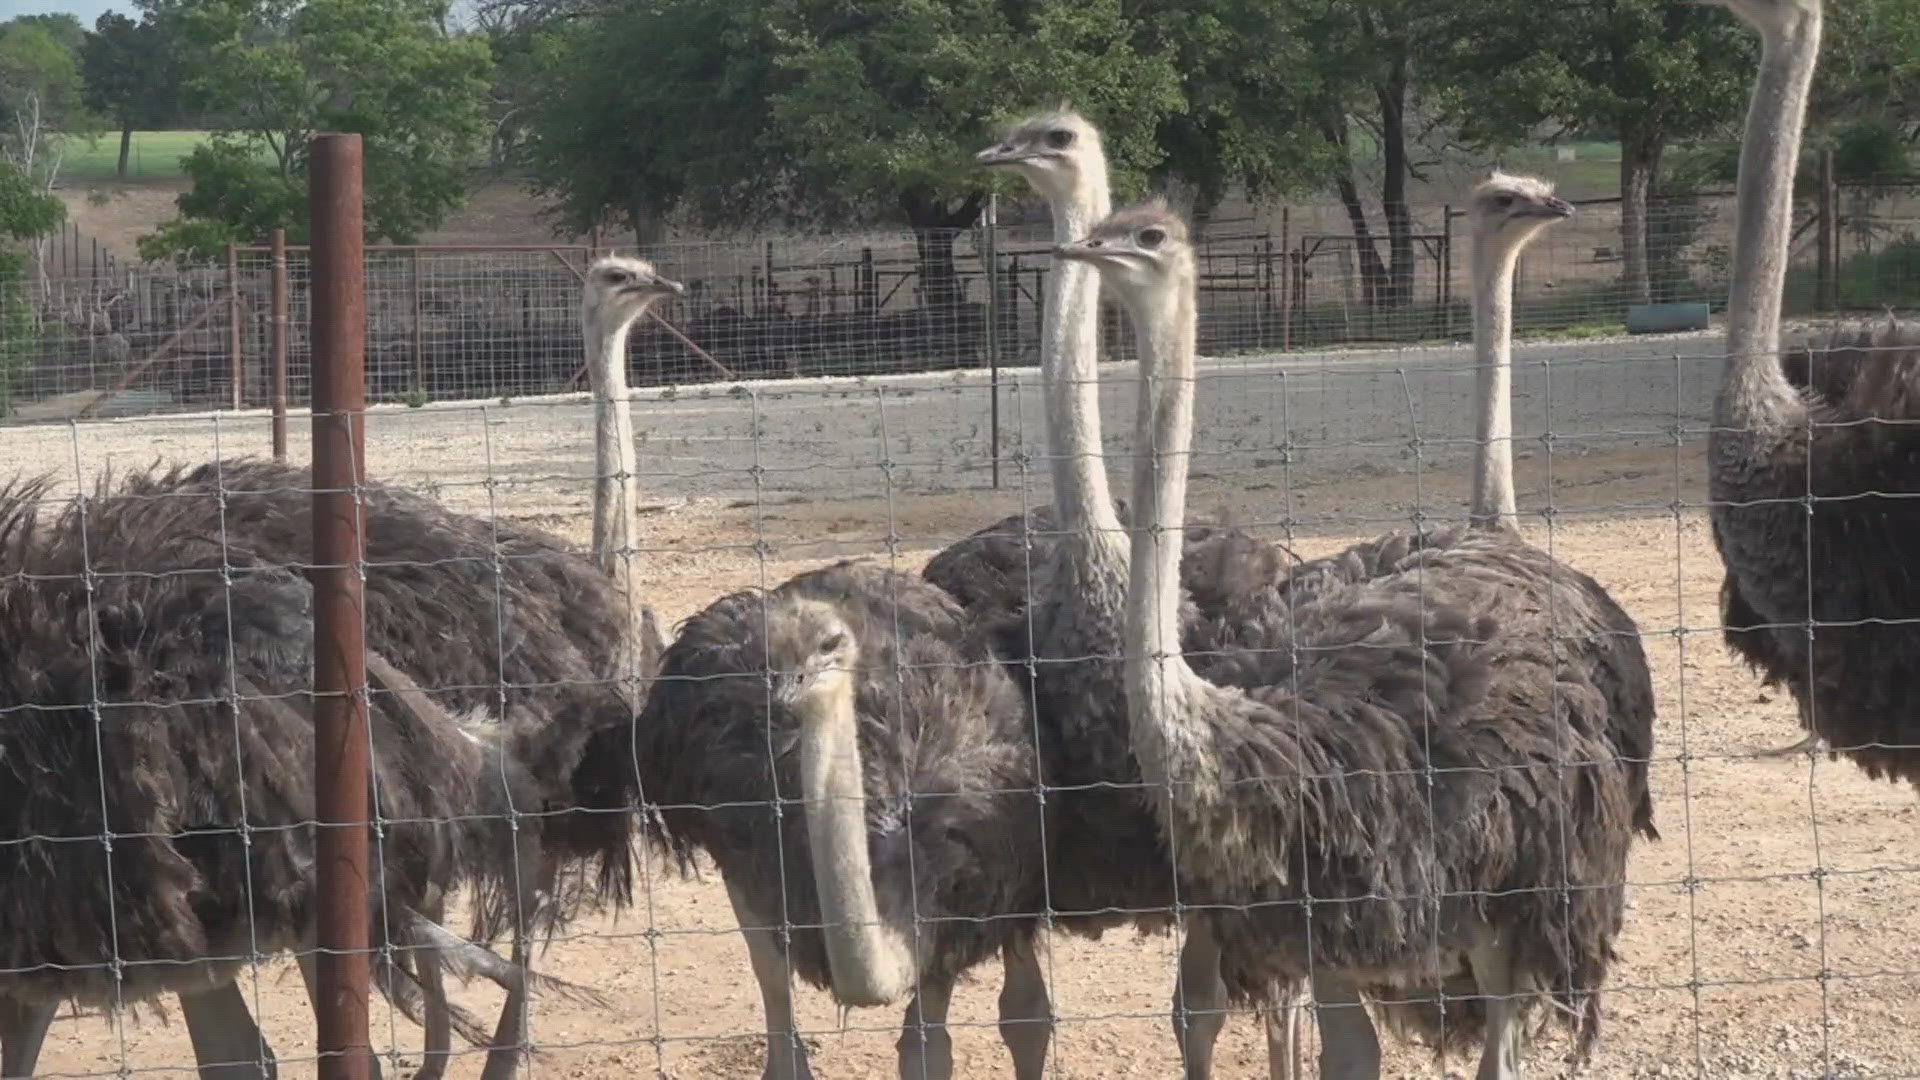 Reg Lindberg said the 204 ostriches were due to be processed for their meat when the floods hit early Sunday morning.